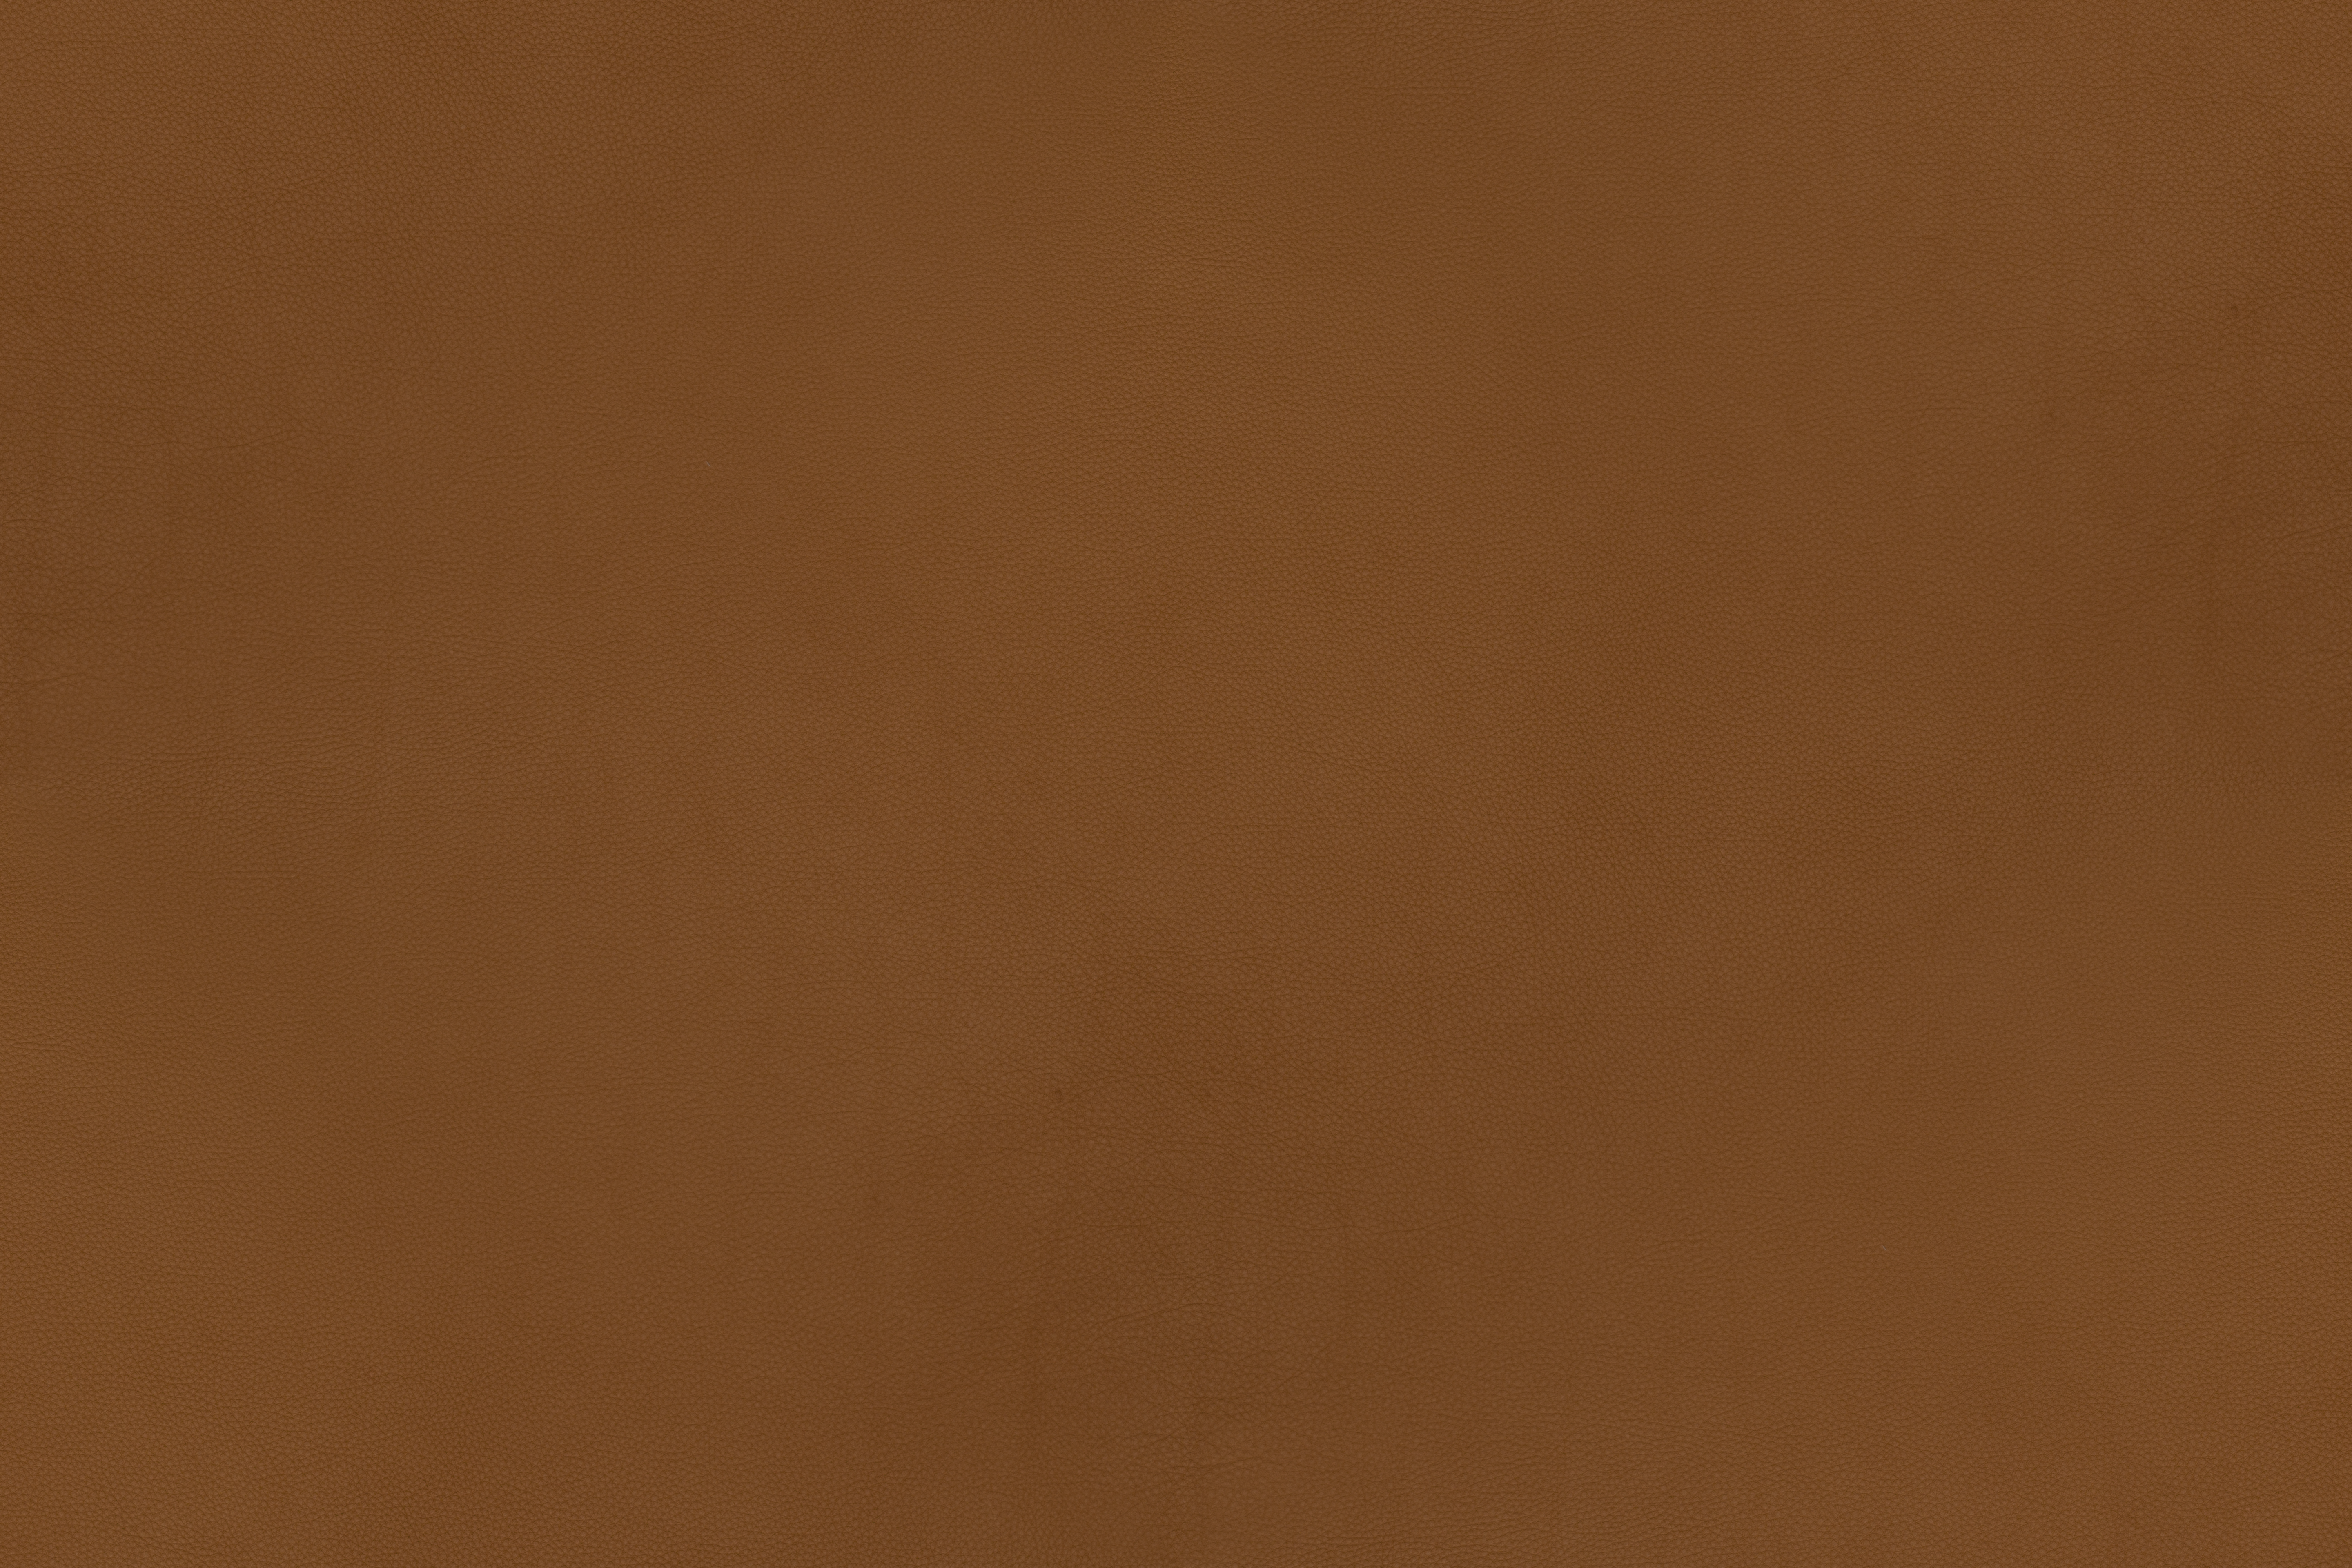 Sorensen Leather - Campo-light brown-20807 by SorensenLeather on ...